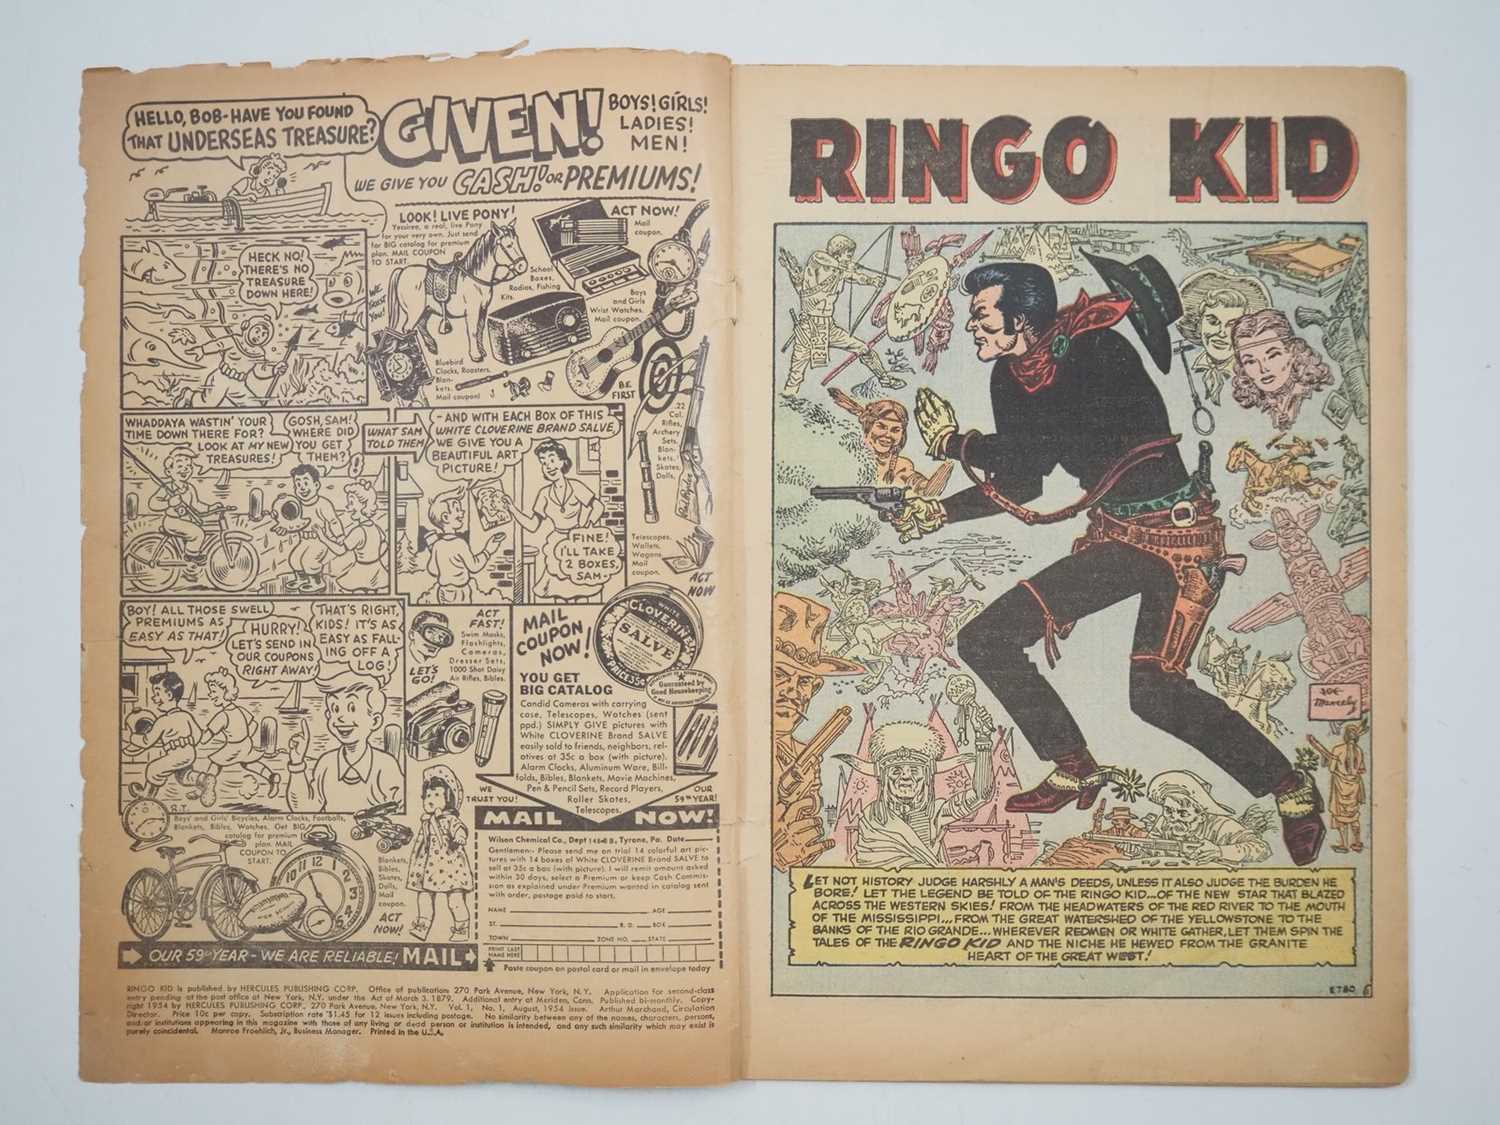 RINGO KID WESTERN #1 (1954 - ATLAS) - Includes Cover art by Joe Maneely - Flat/Unfolded - a detailed - Image 3 of 10